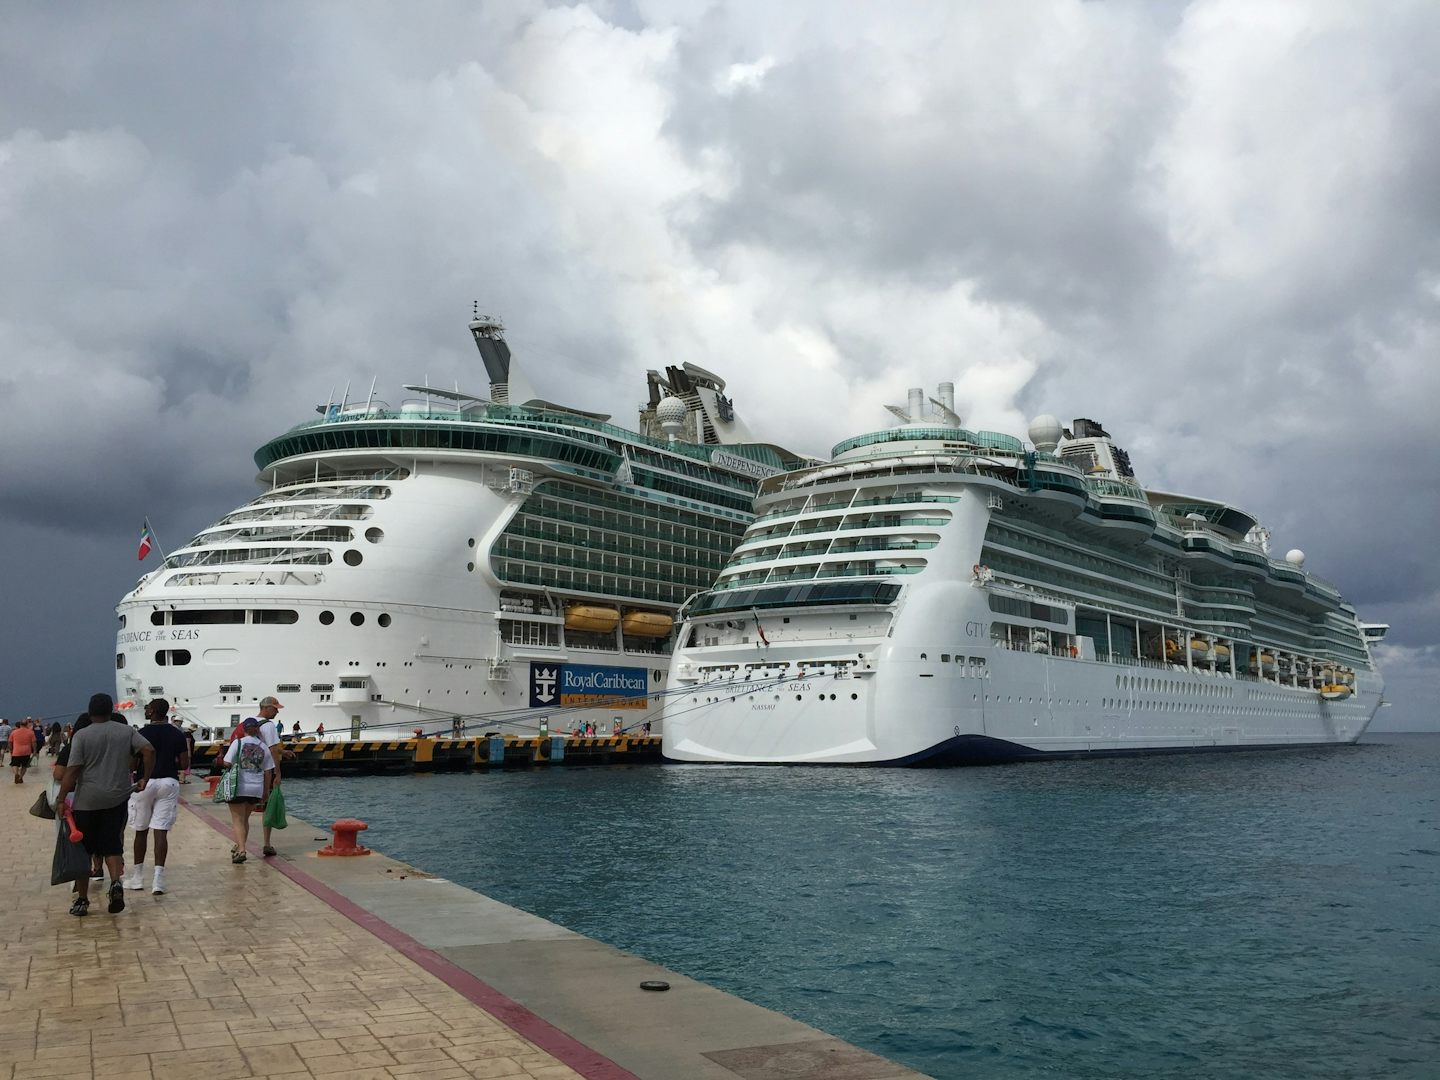 Pictures of Independence of the Seas in port